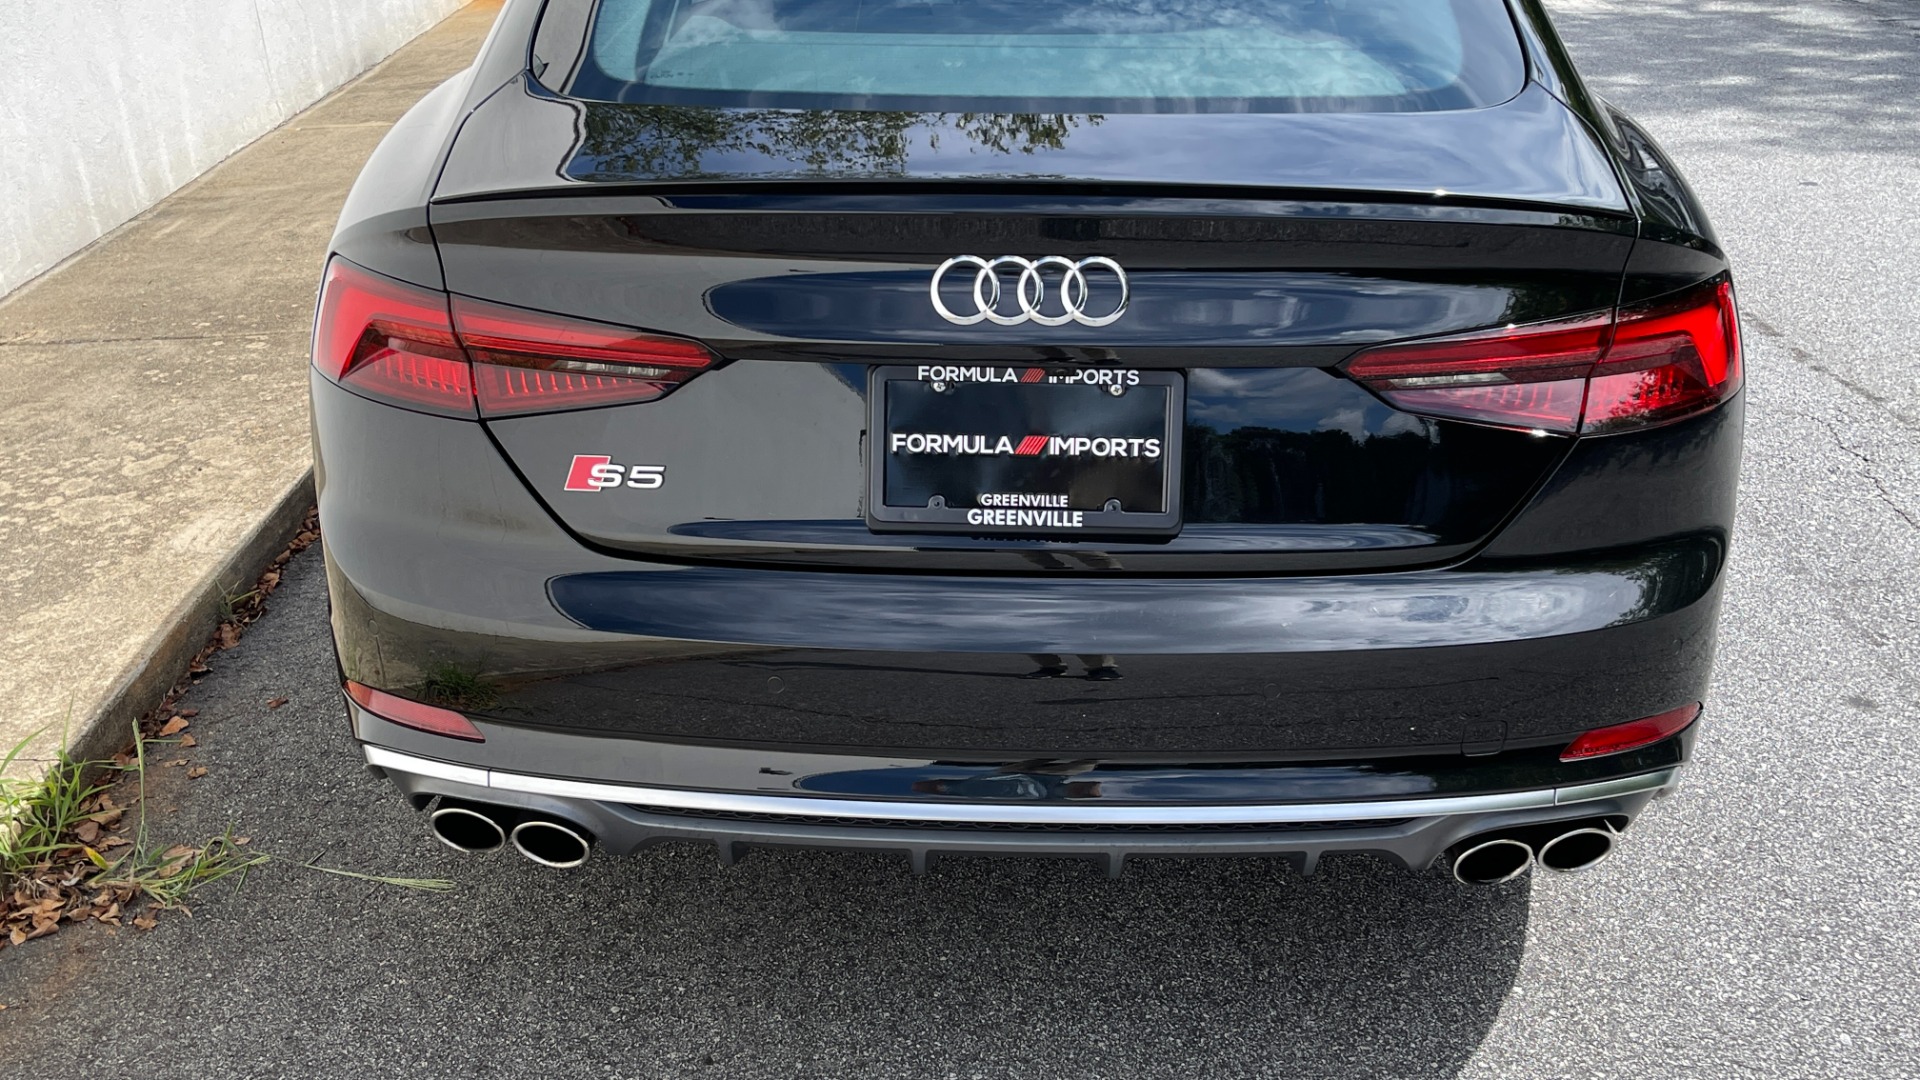 Used 2018 Audi S5 Sportback PRESTIGE / WARM WEATHER / S SPORT / 19IN WHEELS for sale $47,995 at Formula Imports in Charlotte NC 28227 9